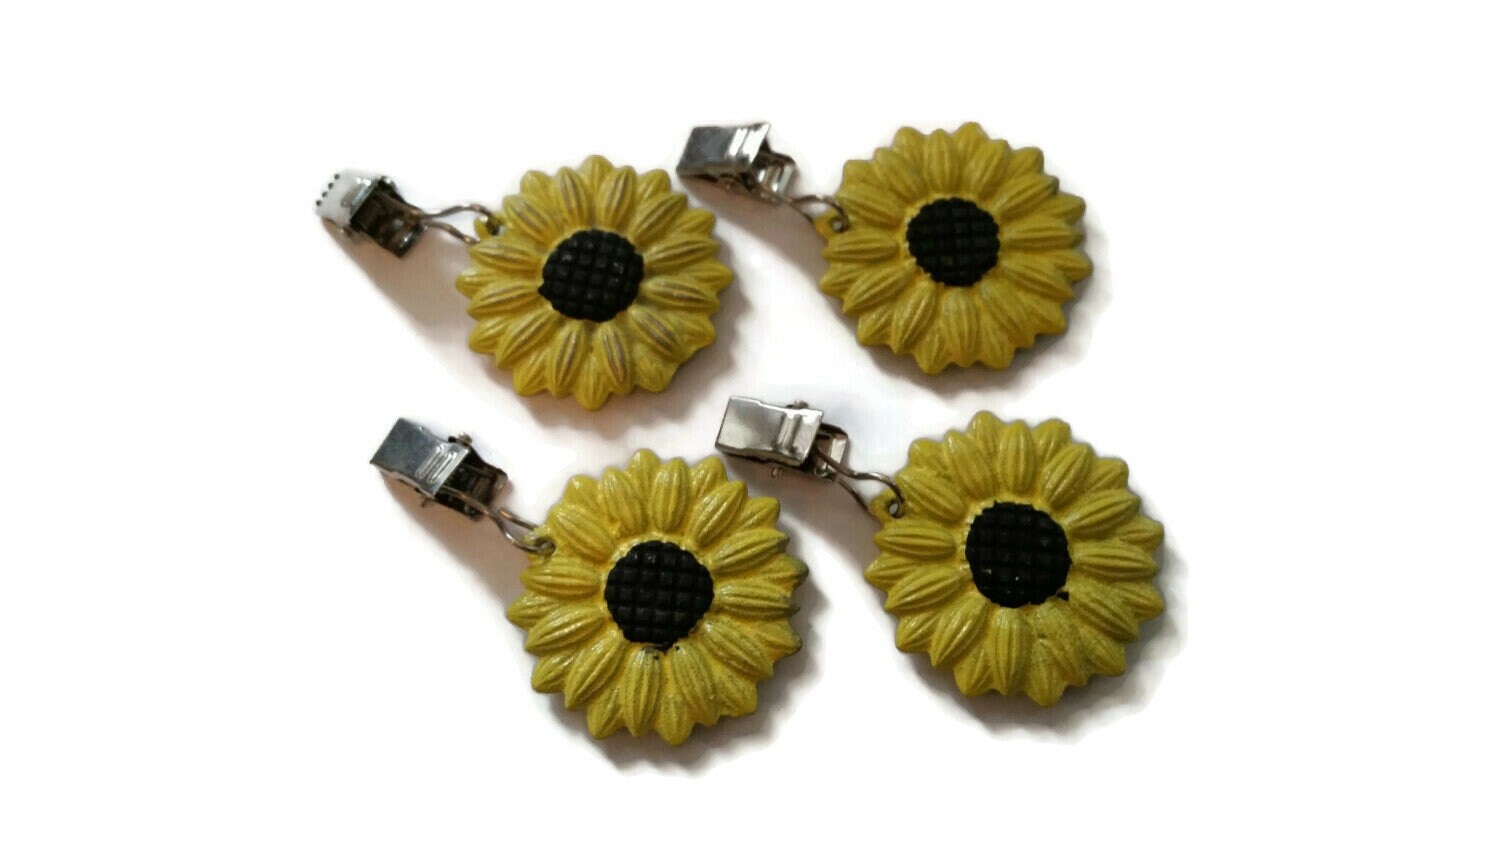 table cloth / curtain weights sunflowers